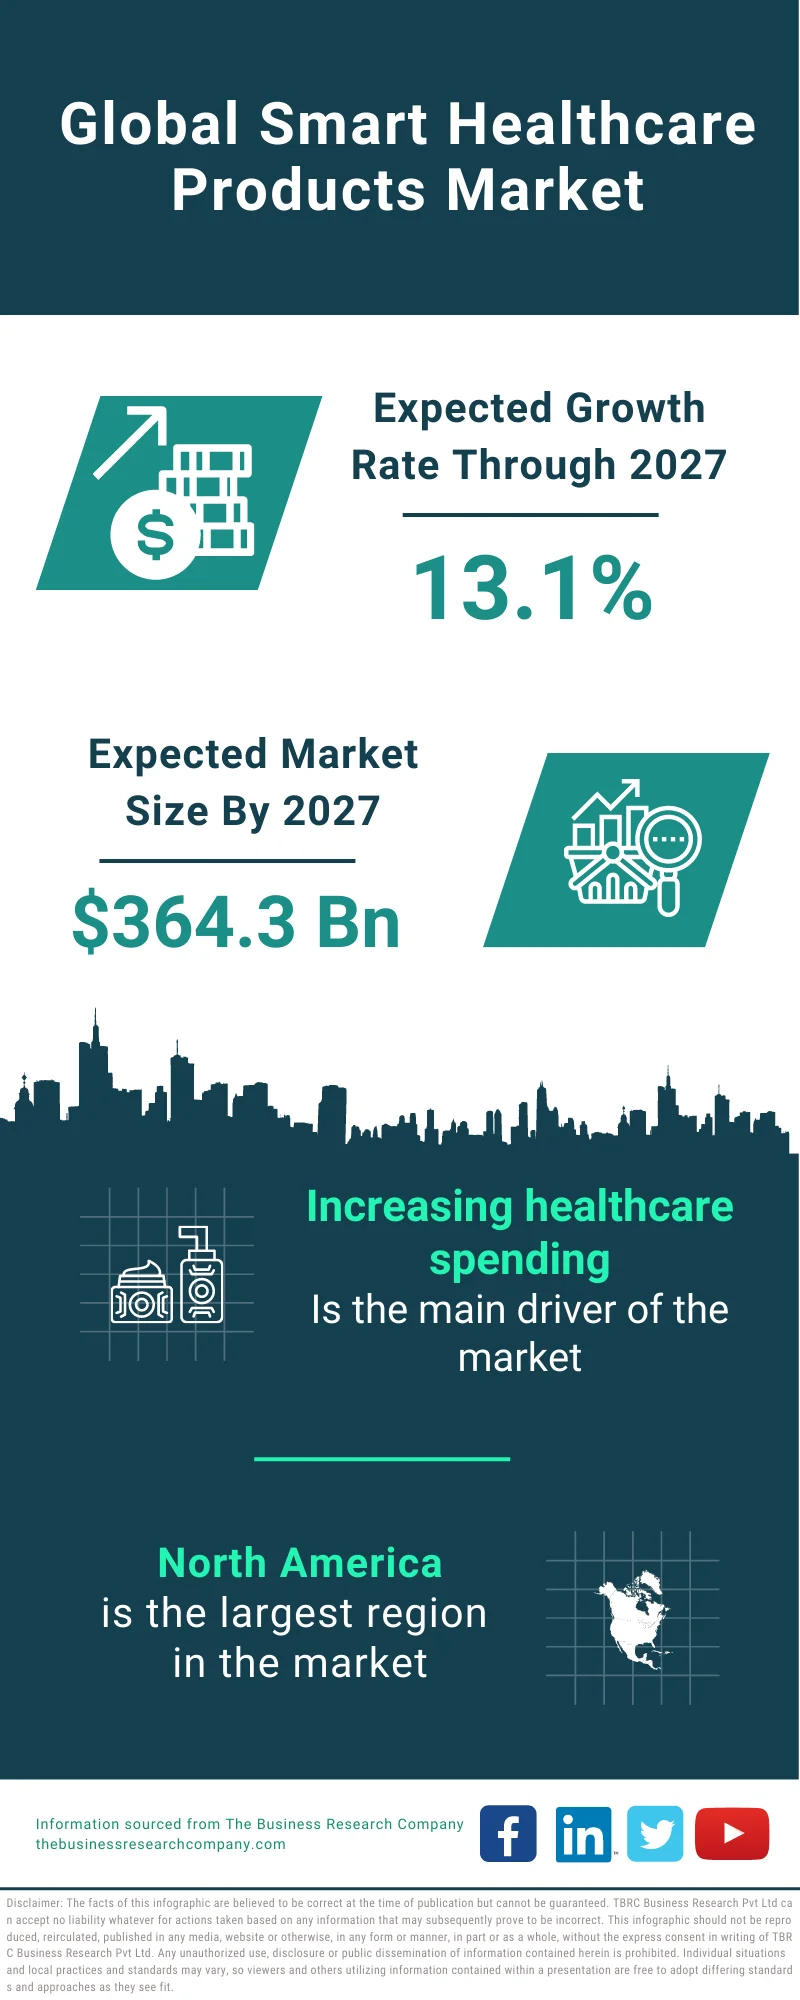 Smart Healthcare Products Market